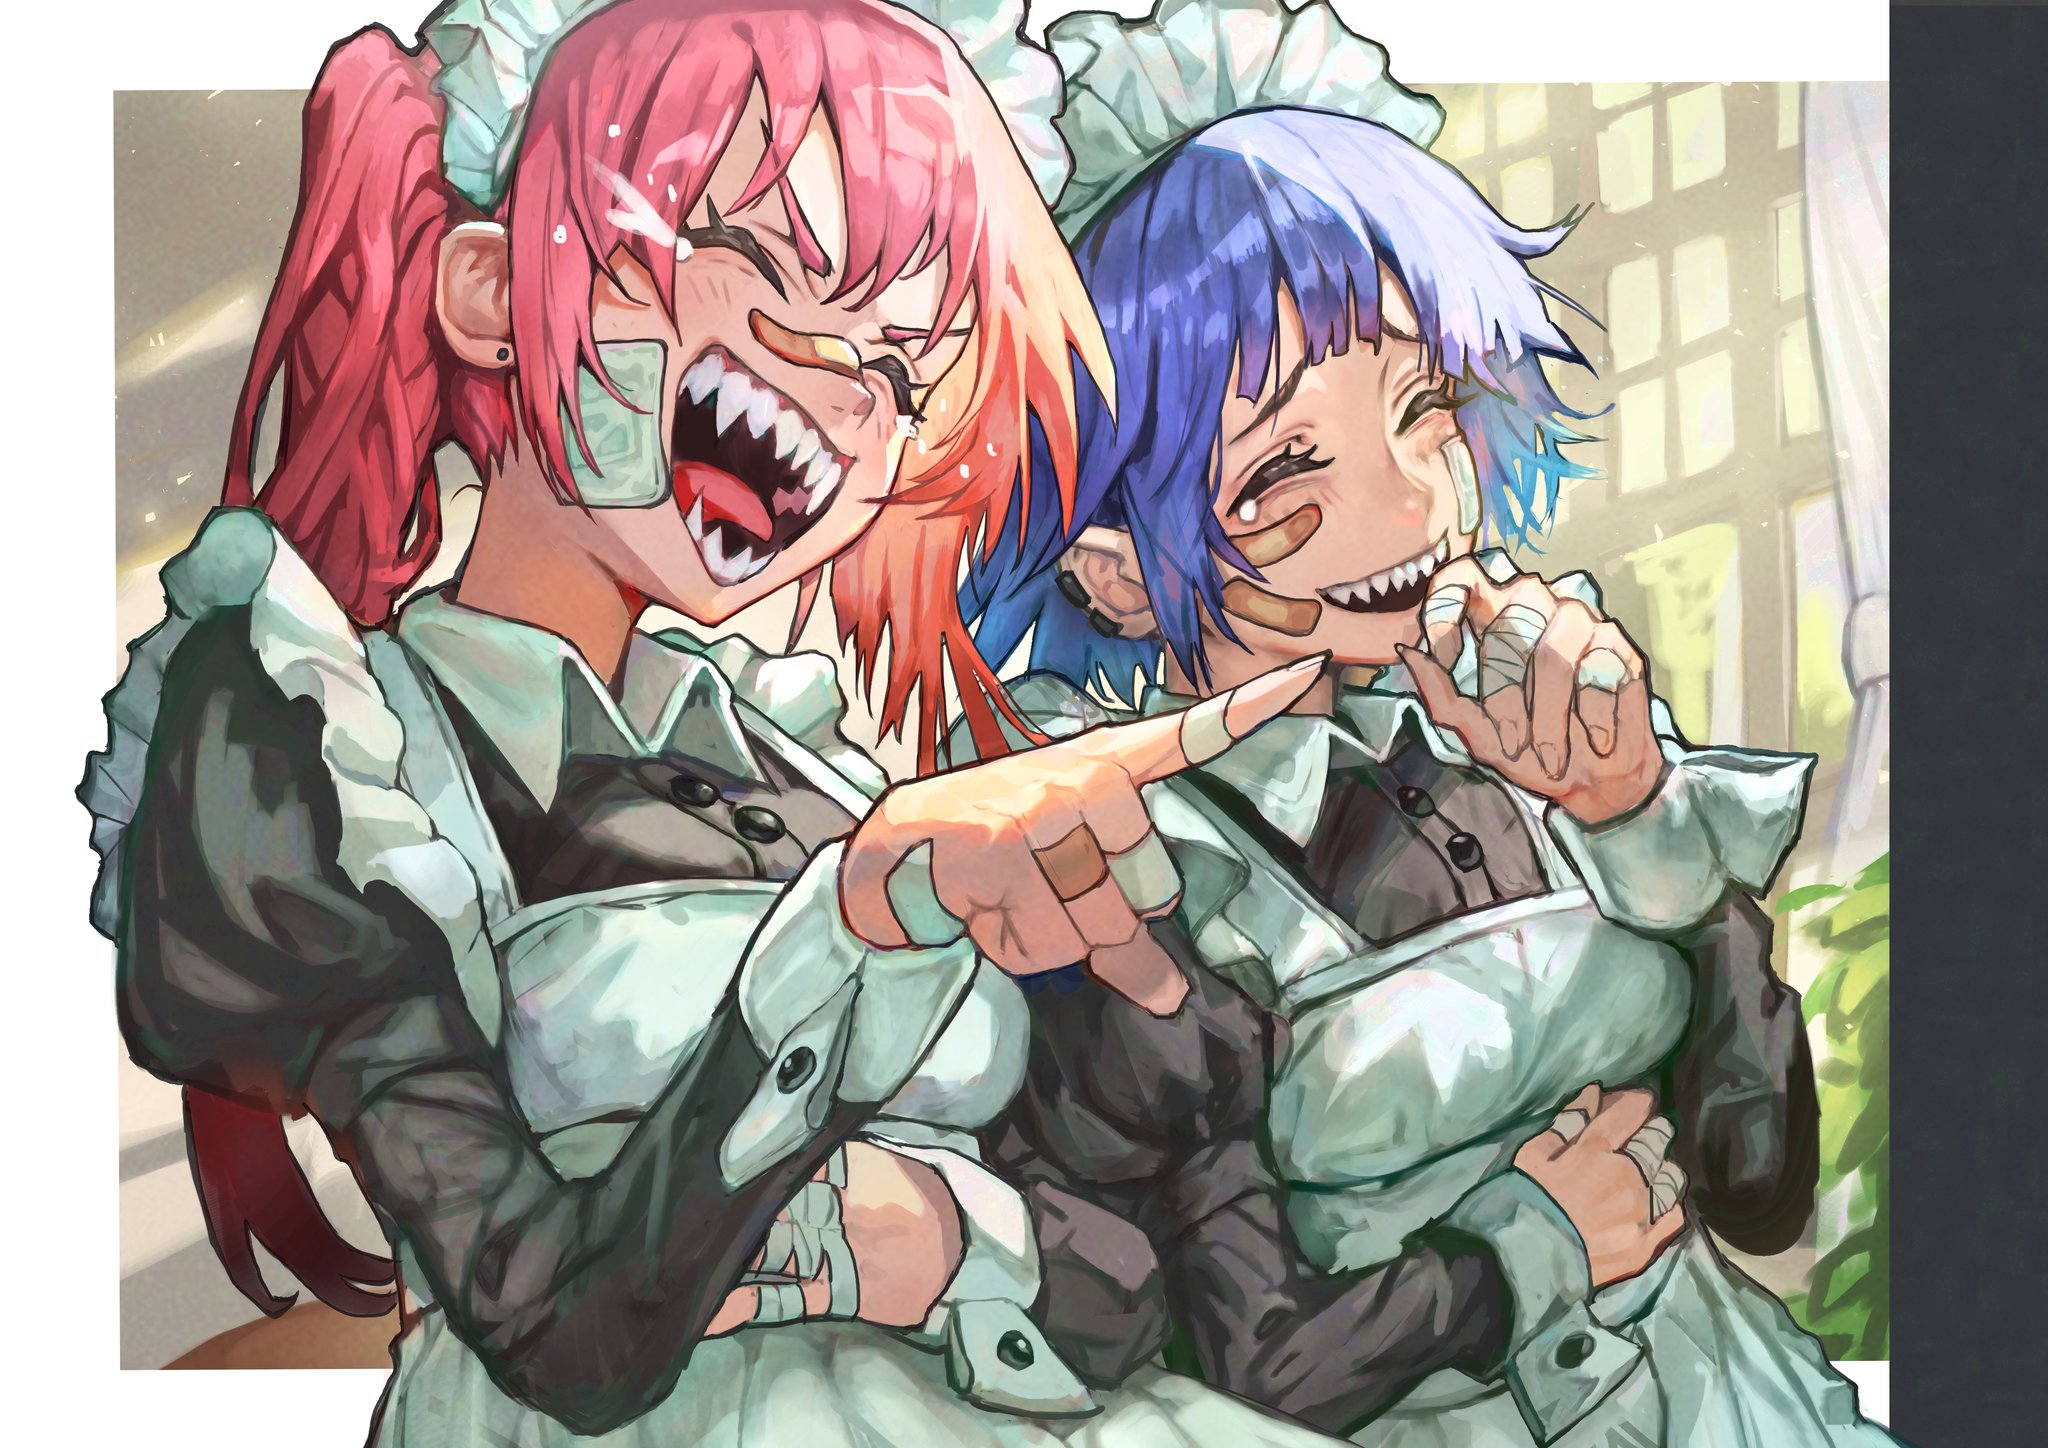 Anime 2048x1448 maid finger pointing laughing plaster pointy teeth pink hair blue hair crying pierced ear band-aid anime girls maid outfit closed eyes